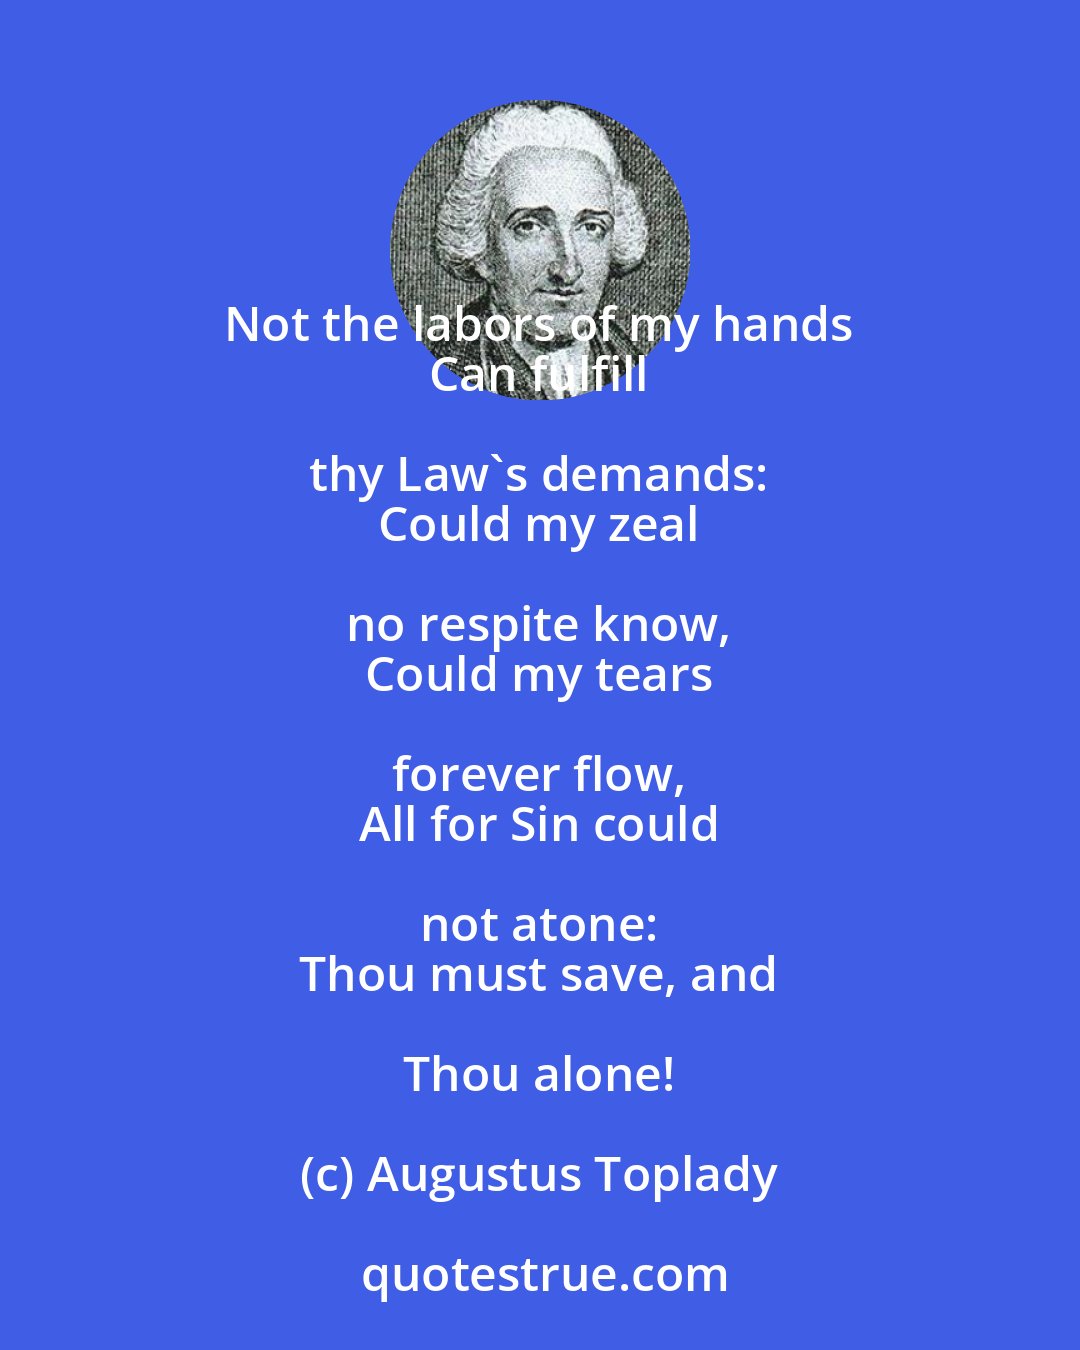 Augustus Toplady: Not the labors of my hands 
 Can fulfill thy Law's demands: 
 Could my zeal no respite know, 
 Could my tears forever flow, 
 All for Sin could not atone: 
 Thou must save, and Thou alone!